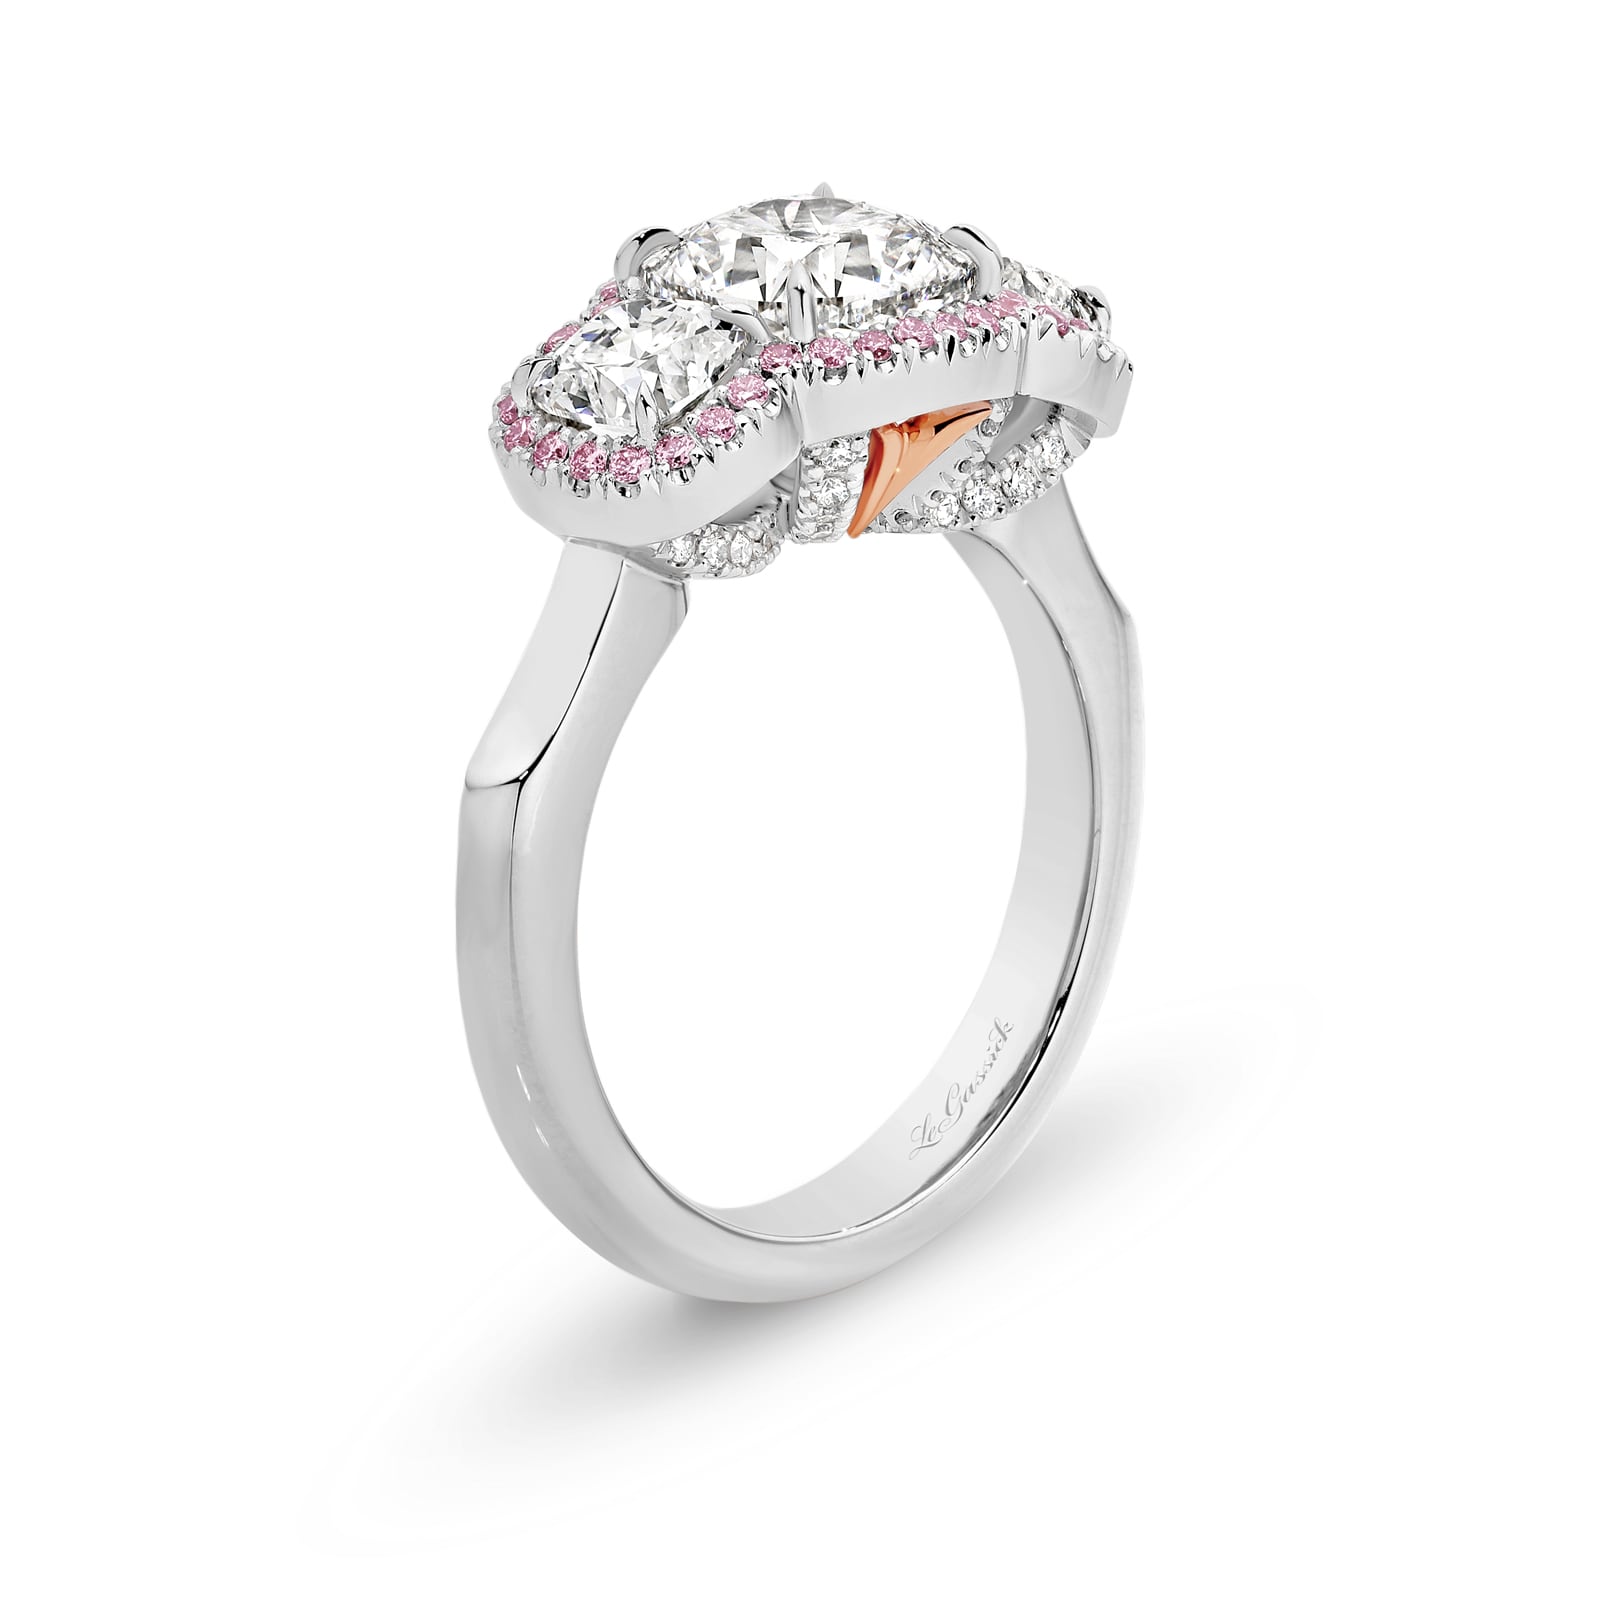 Melody features a trilogy of cushion-cut diamonds which includes a 2.11 carat centre stone with 2 x 0.50ct side stones that have been encircled by a halo of rare natural Argyle pink diamonds. Melody is delicately set with a further 40 round brilliant cut diamonds underneath the trilogy. She was designed and handcrafted by LeGassick's Master Jewellers, Gold Coast, Australia.